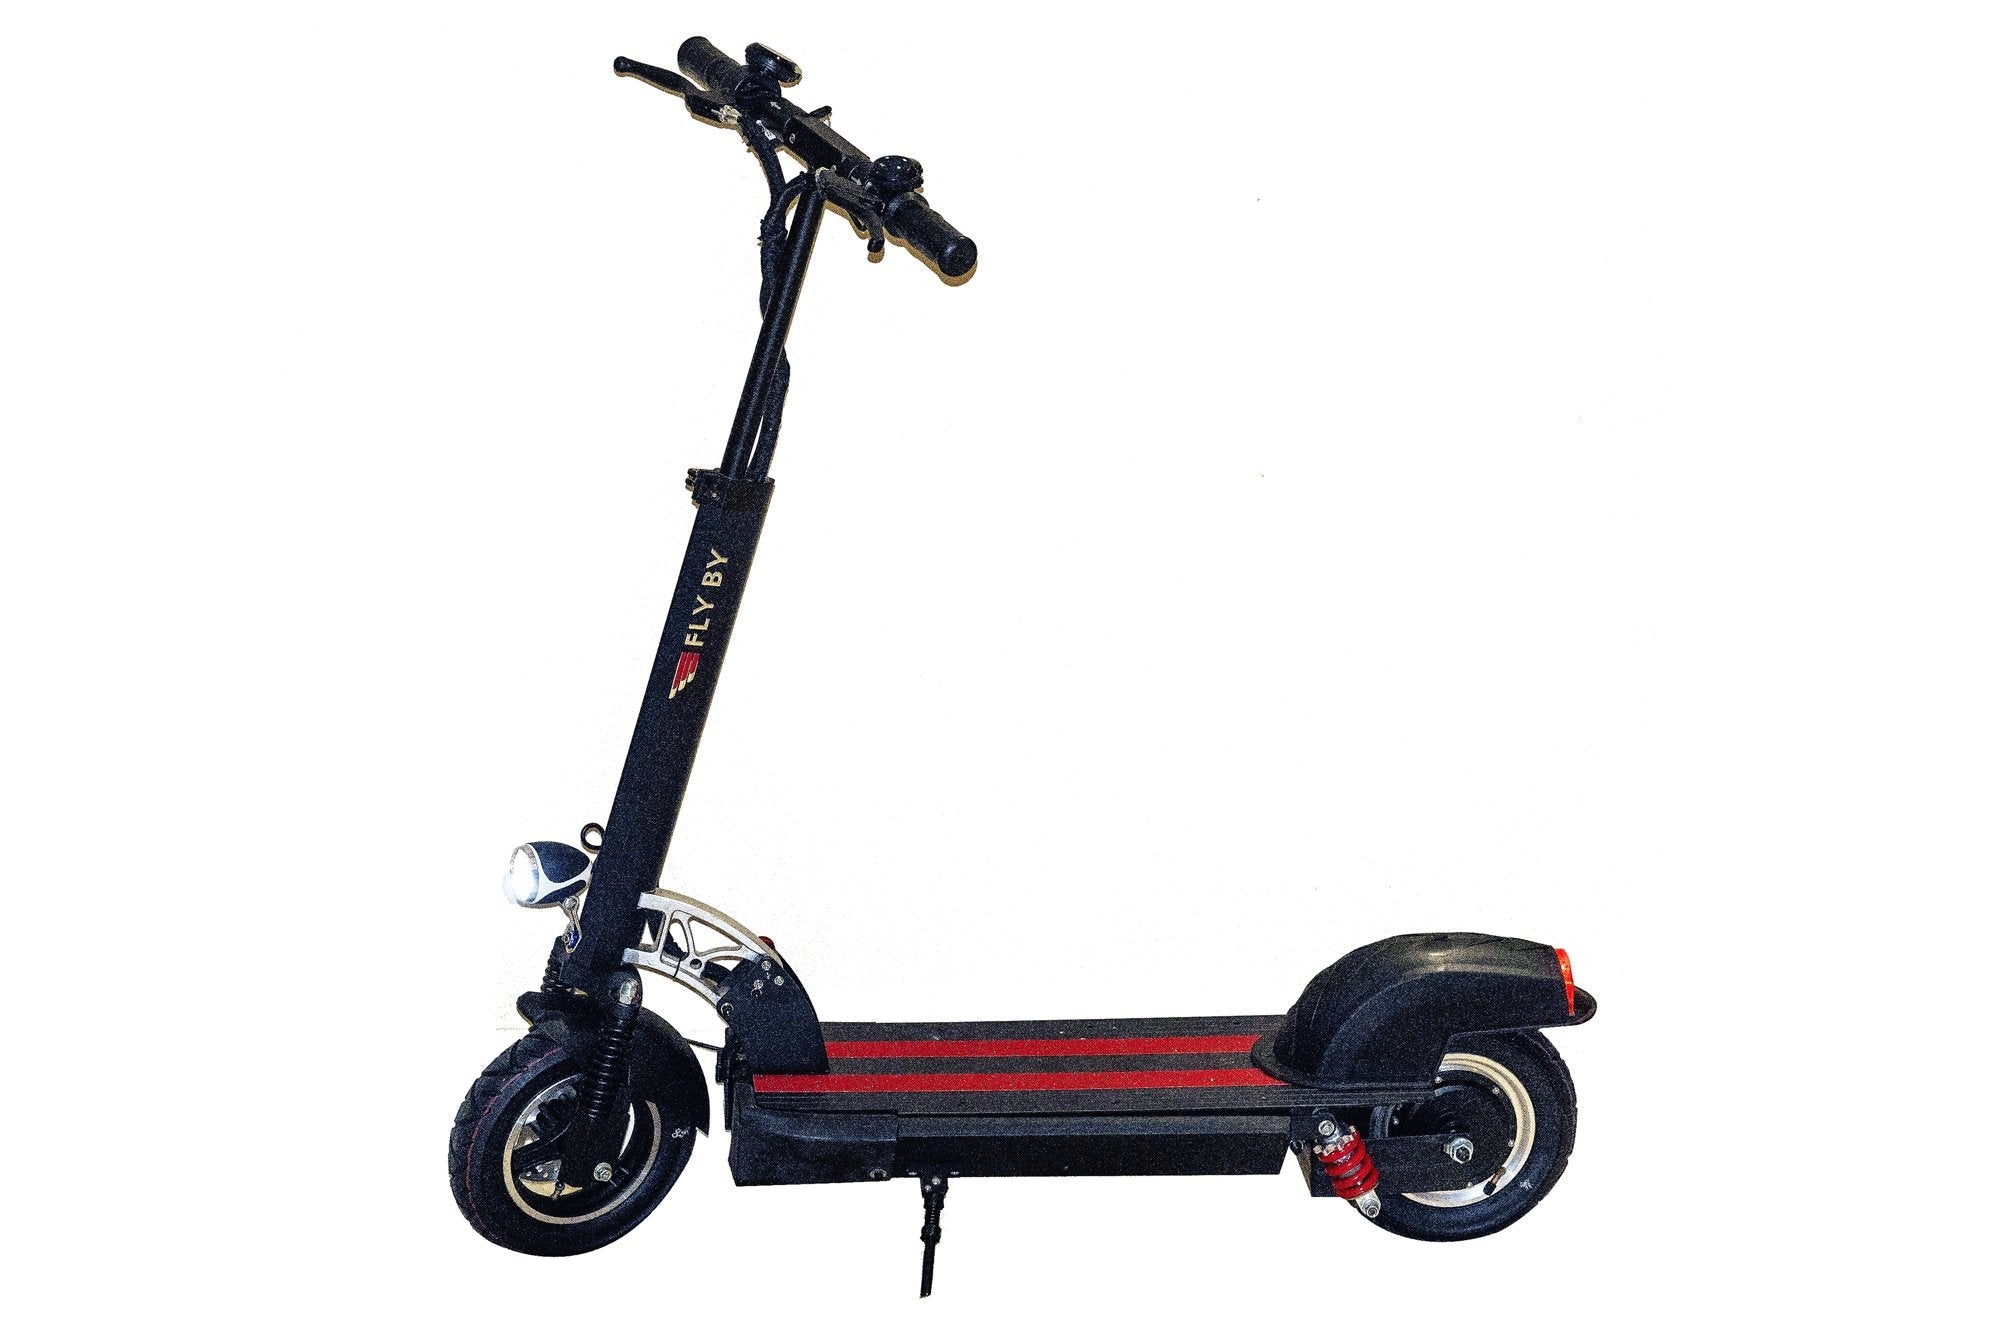 2022 Green Bike USA GB FLYBY 500W 48V Folding Suspension Electric Scooter, Removable Seat - Upzy.com